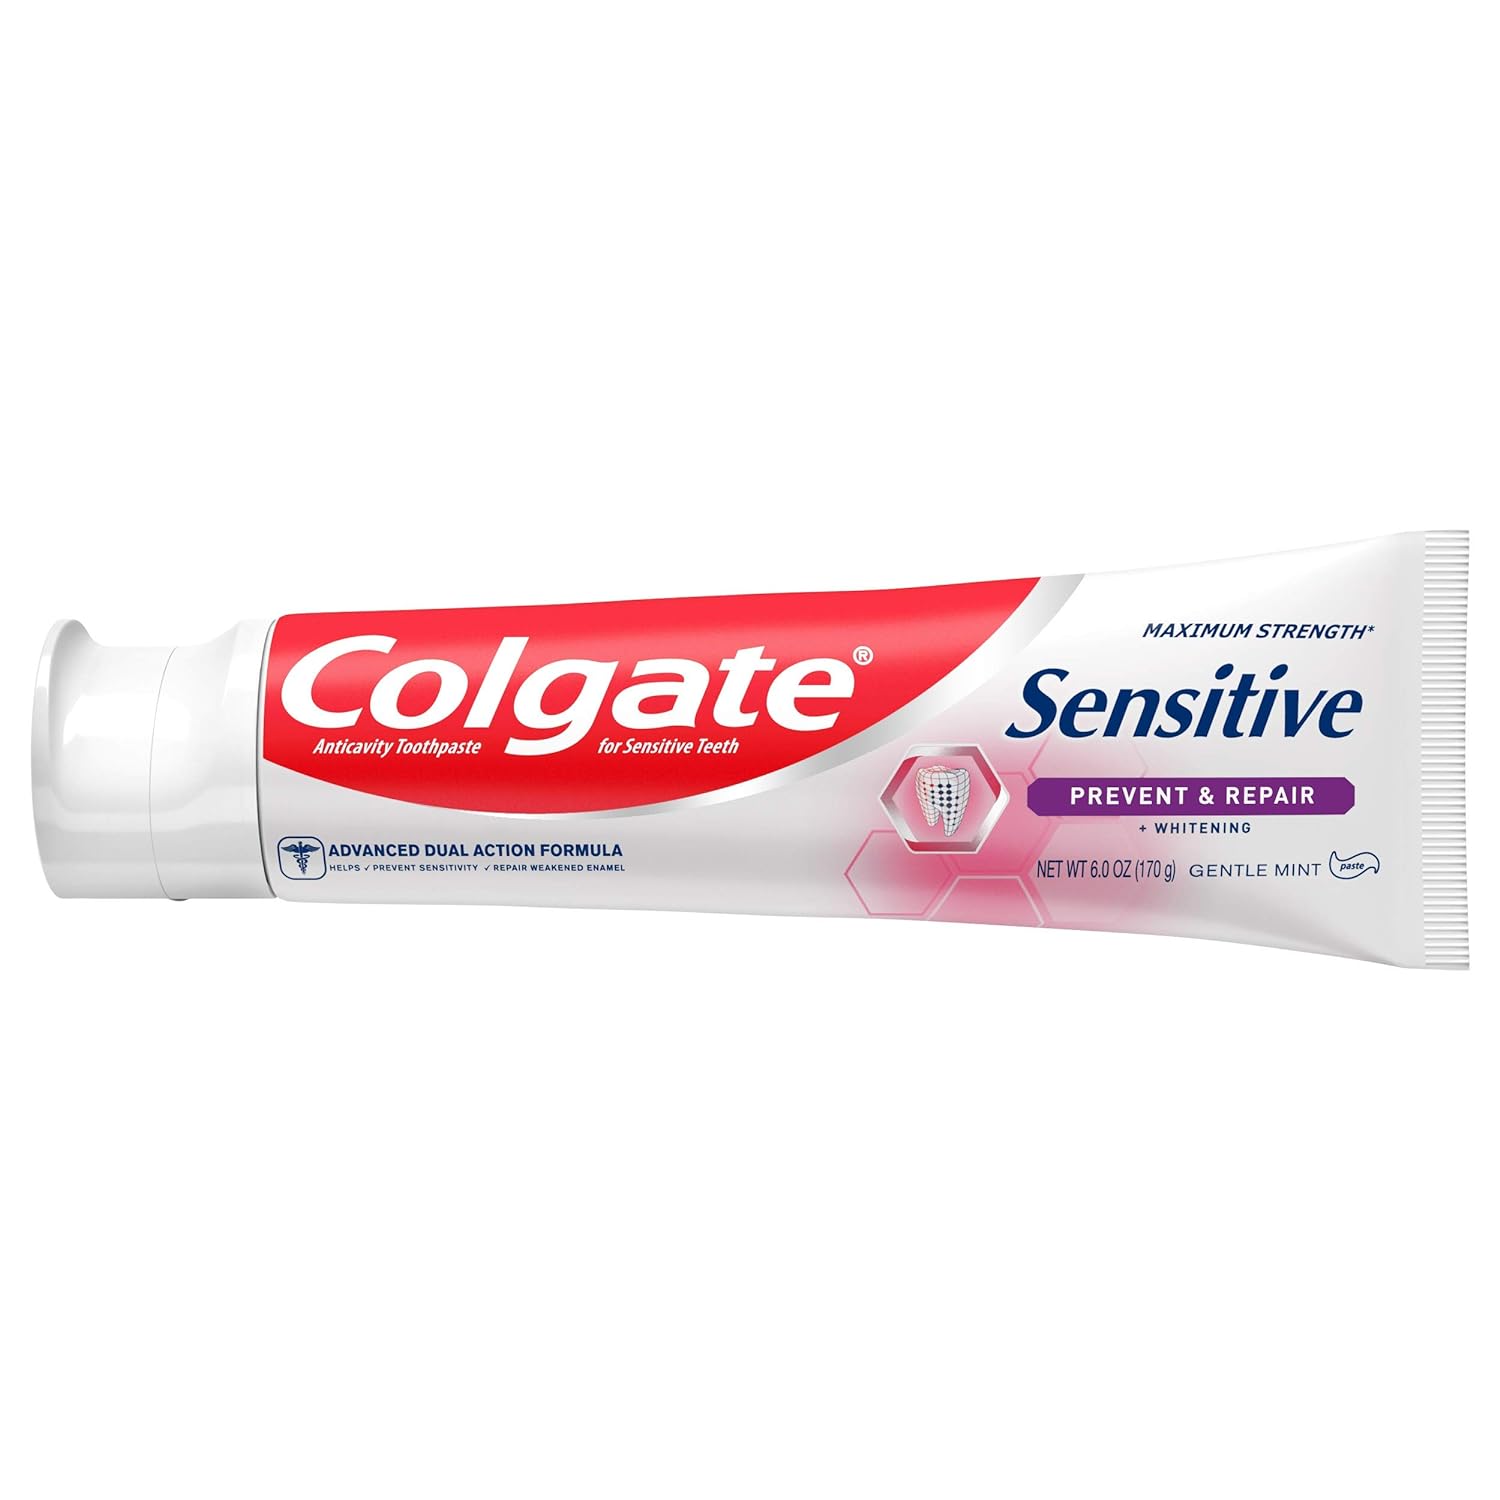 Colgate Sensitive Toothpaste with Whitening, Prevent and Repair, 6 Ounce, 3 Pack : Health & Household